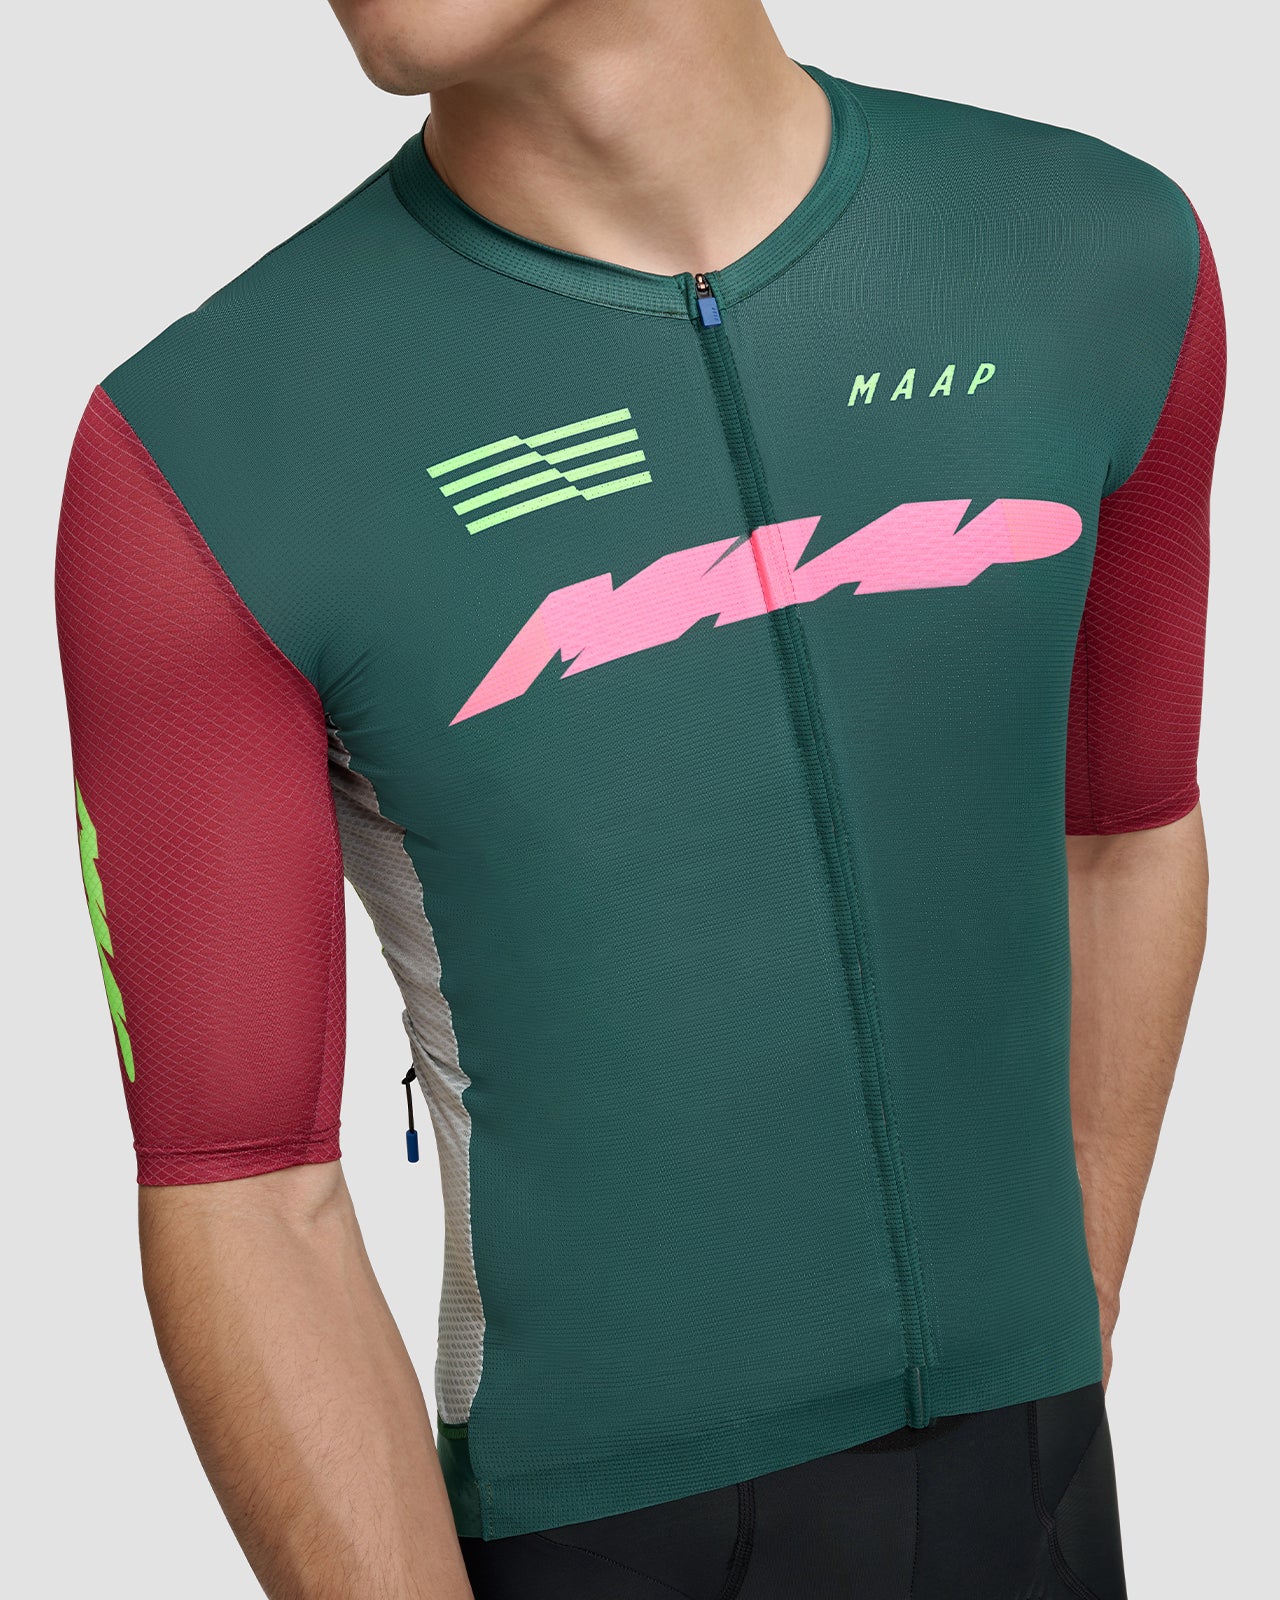 Eclipse Pro Air Jersey 2.0 - MAAP Cycling Apparel